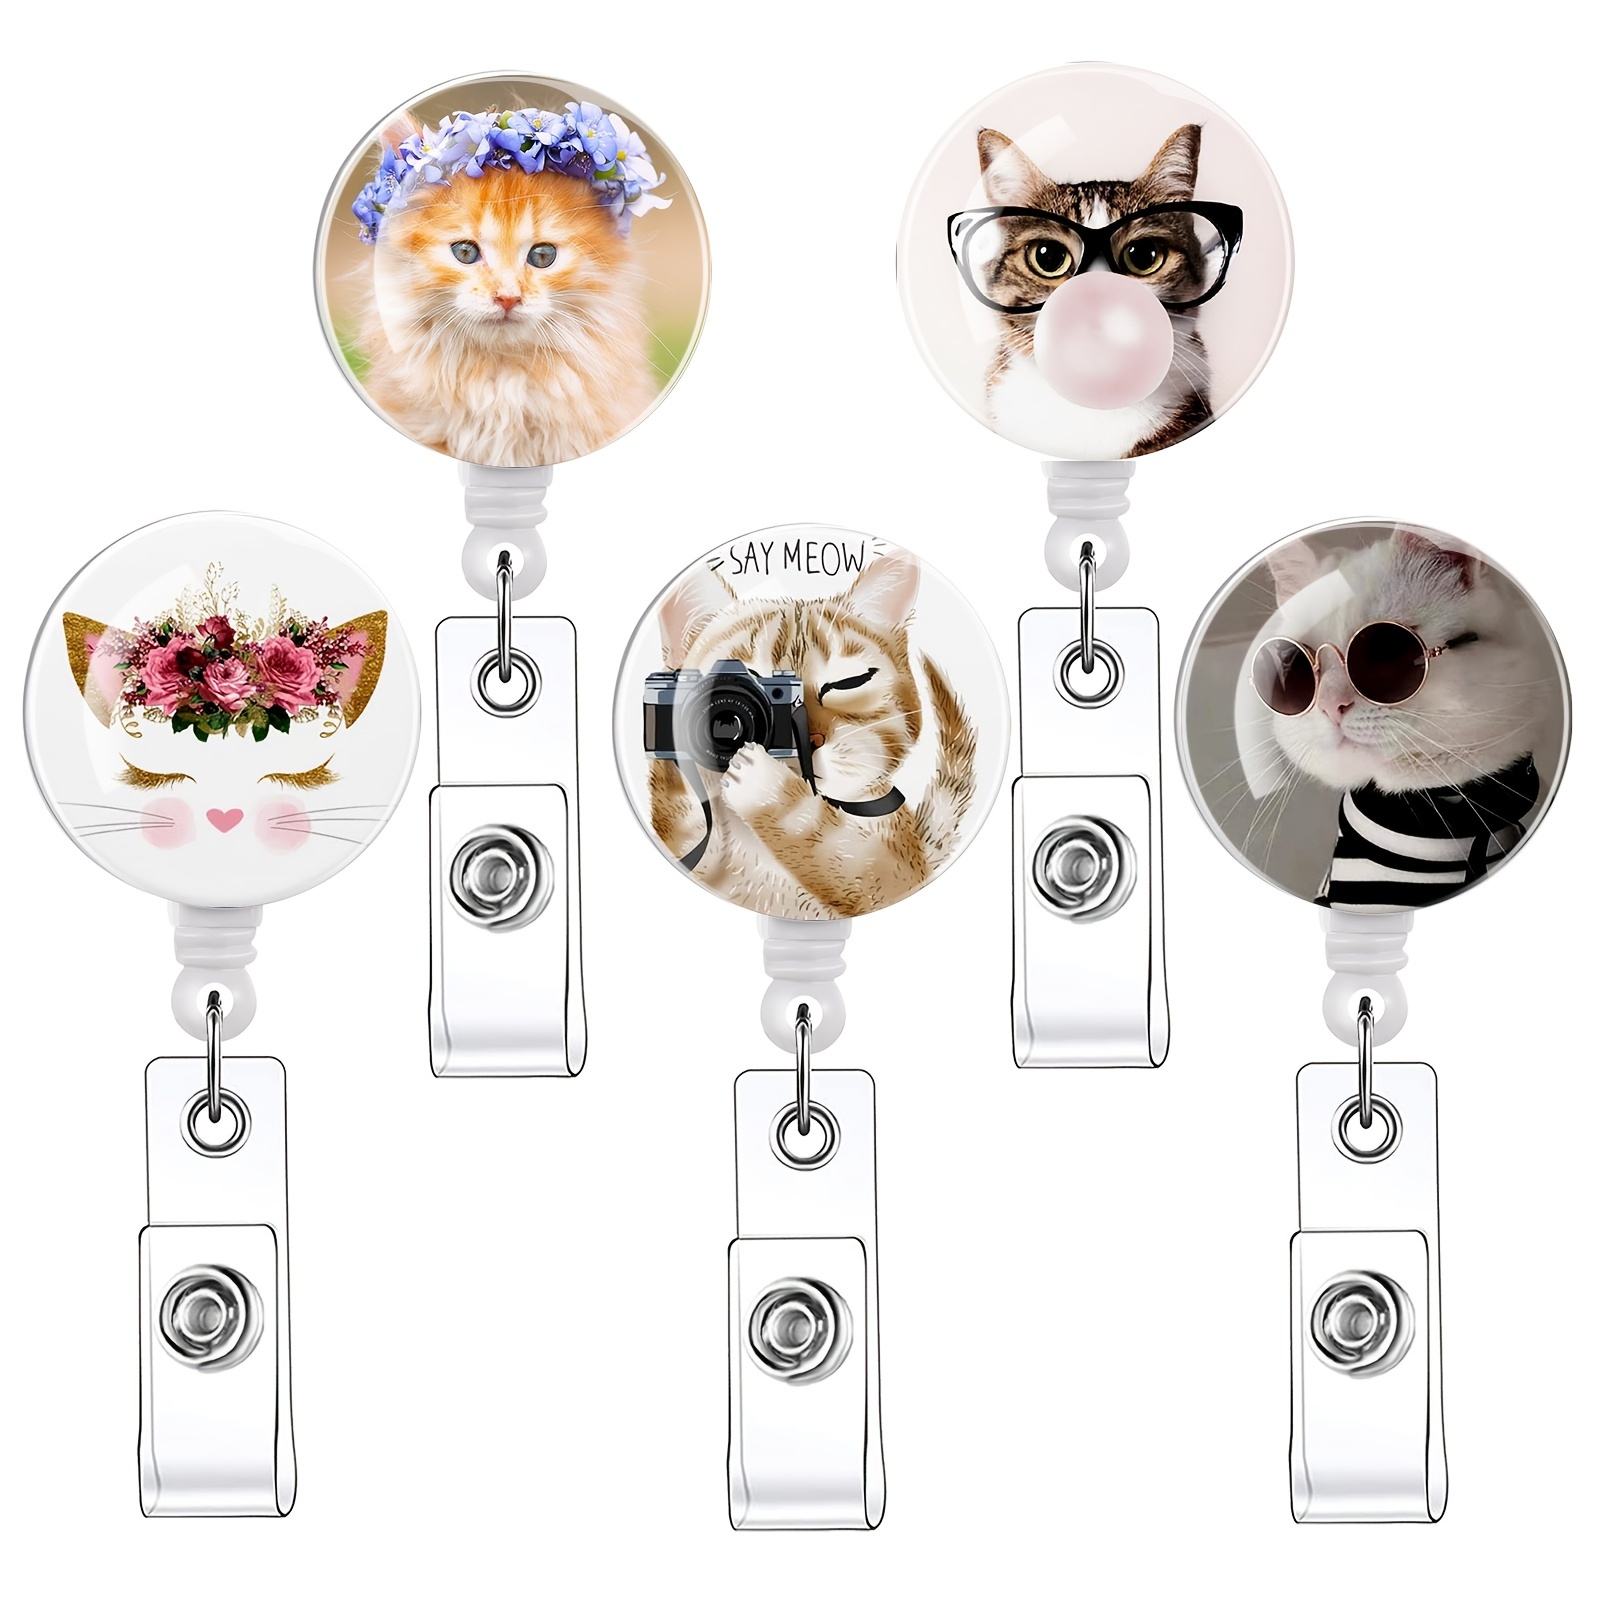 Flower,pcs Funny Cat Badge Reels Retractable Badge Holders, Nurse Badge Reel Cute Badge Reel Retractable Lanyards for ID Badges, Nurse Accessories